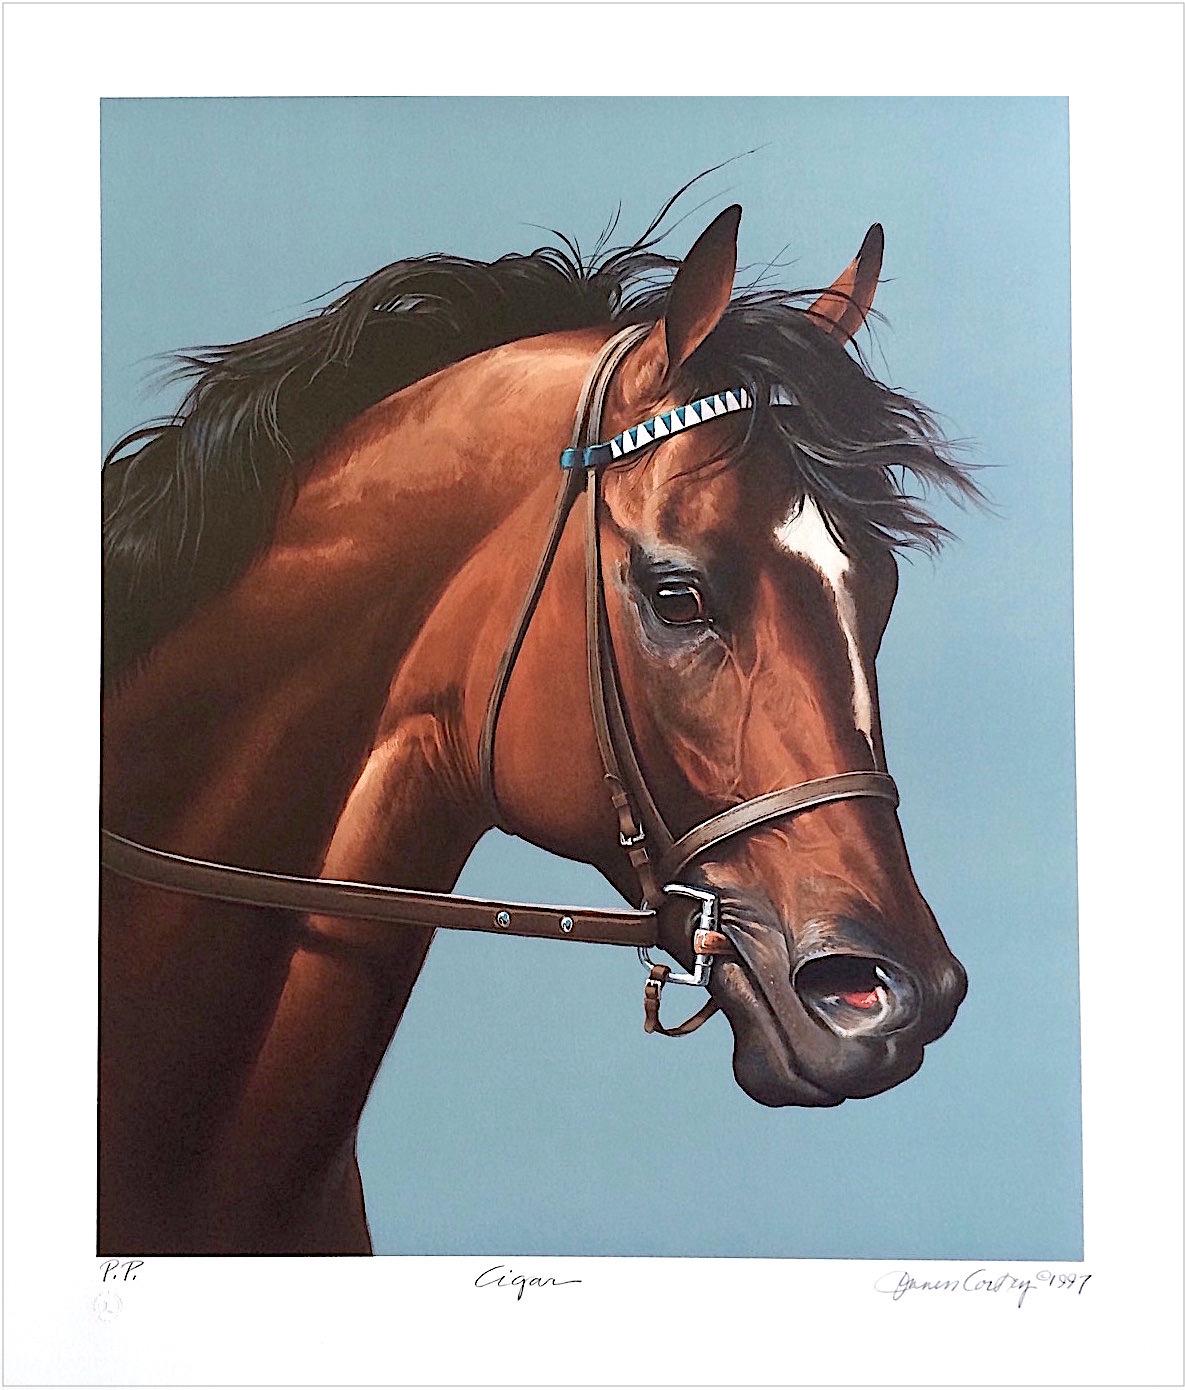 CIGAR Champion Horse Portrait Signed Lithograph Equine Art, Horse Racing History - Gray Animal Print by Jenness Cortez